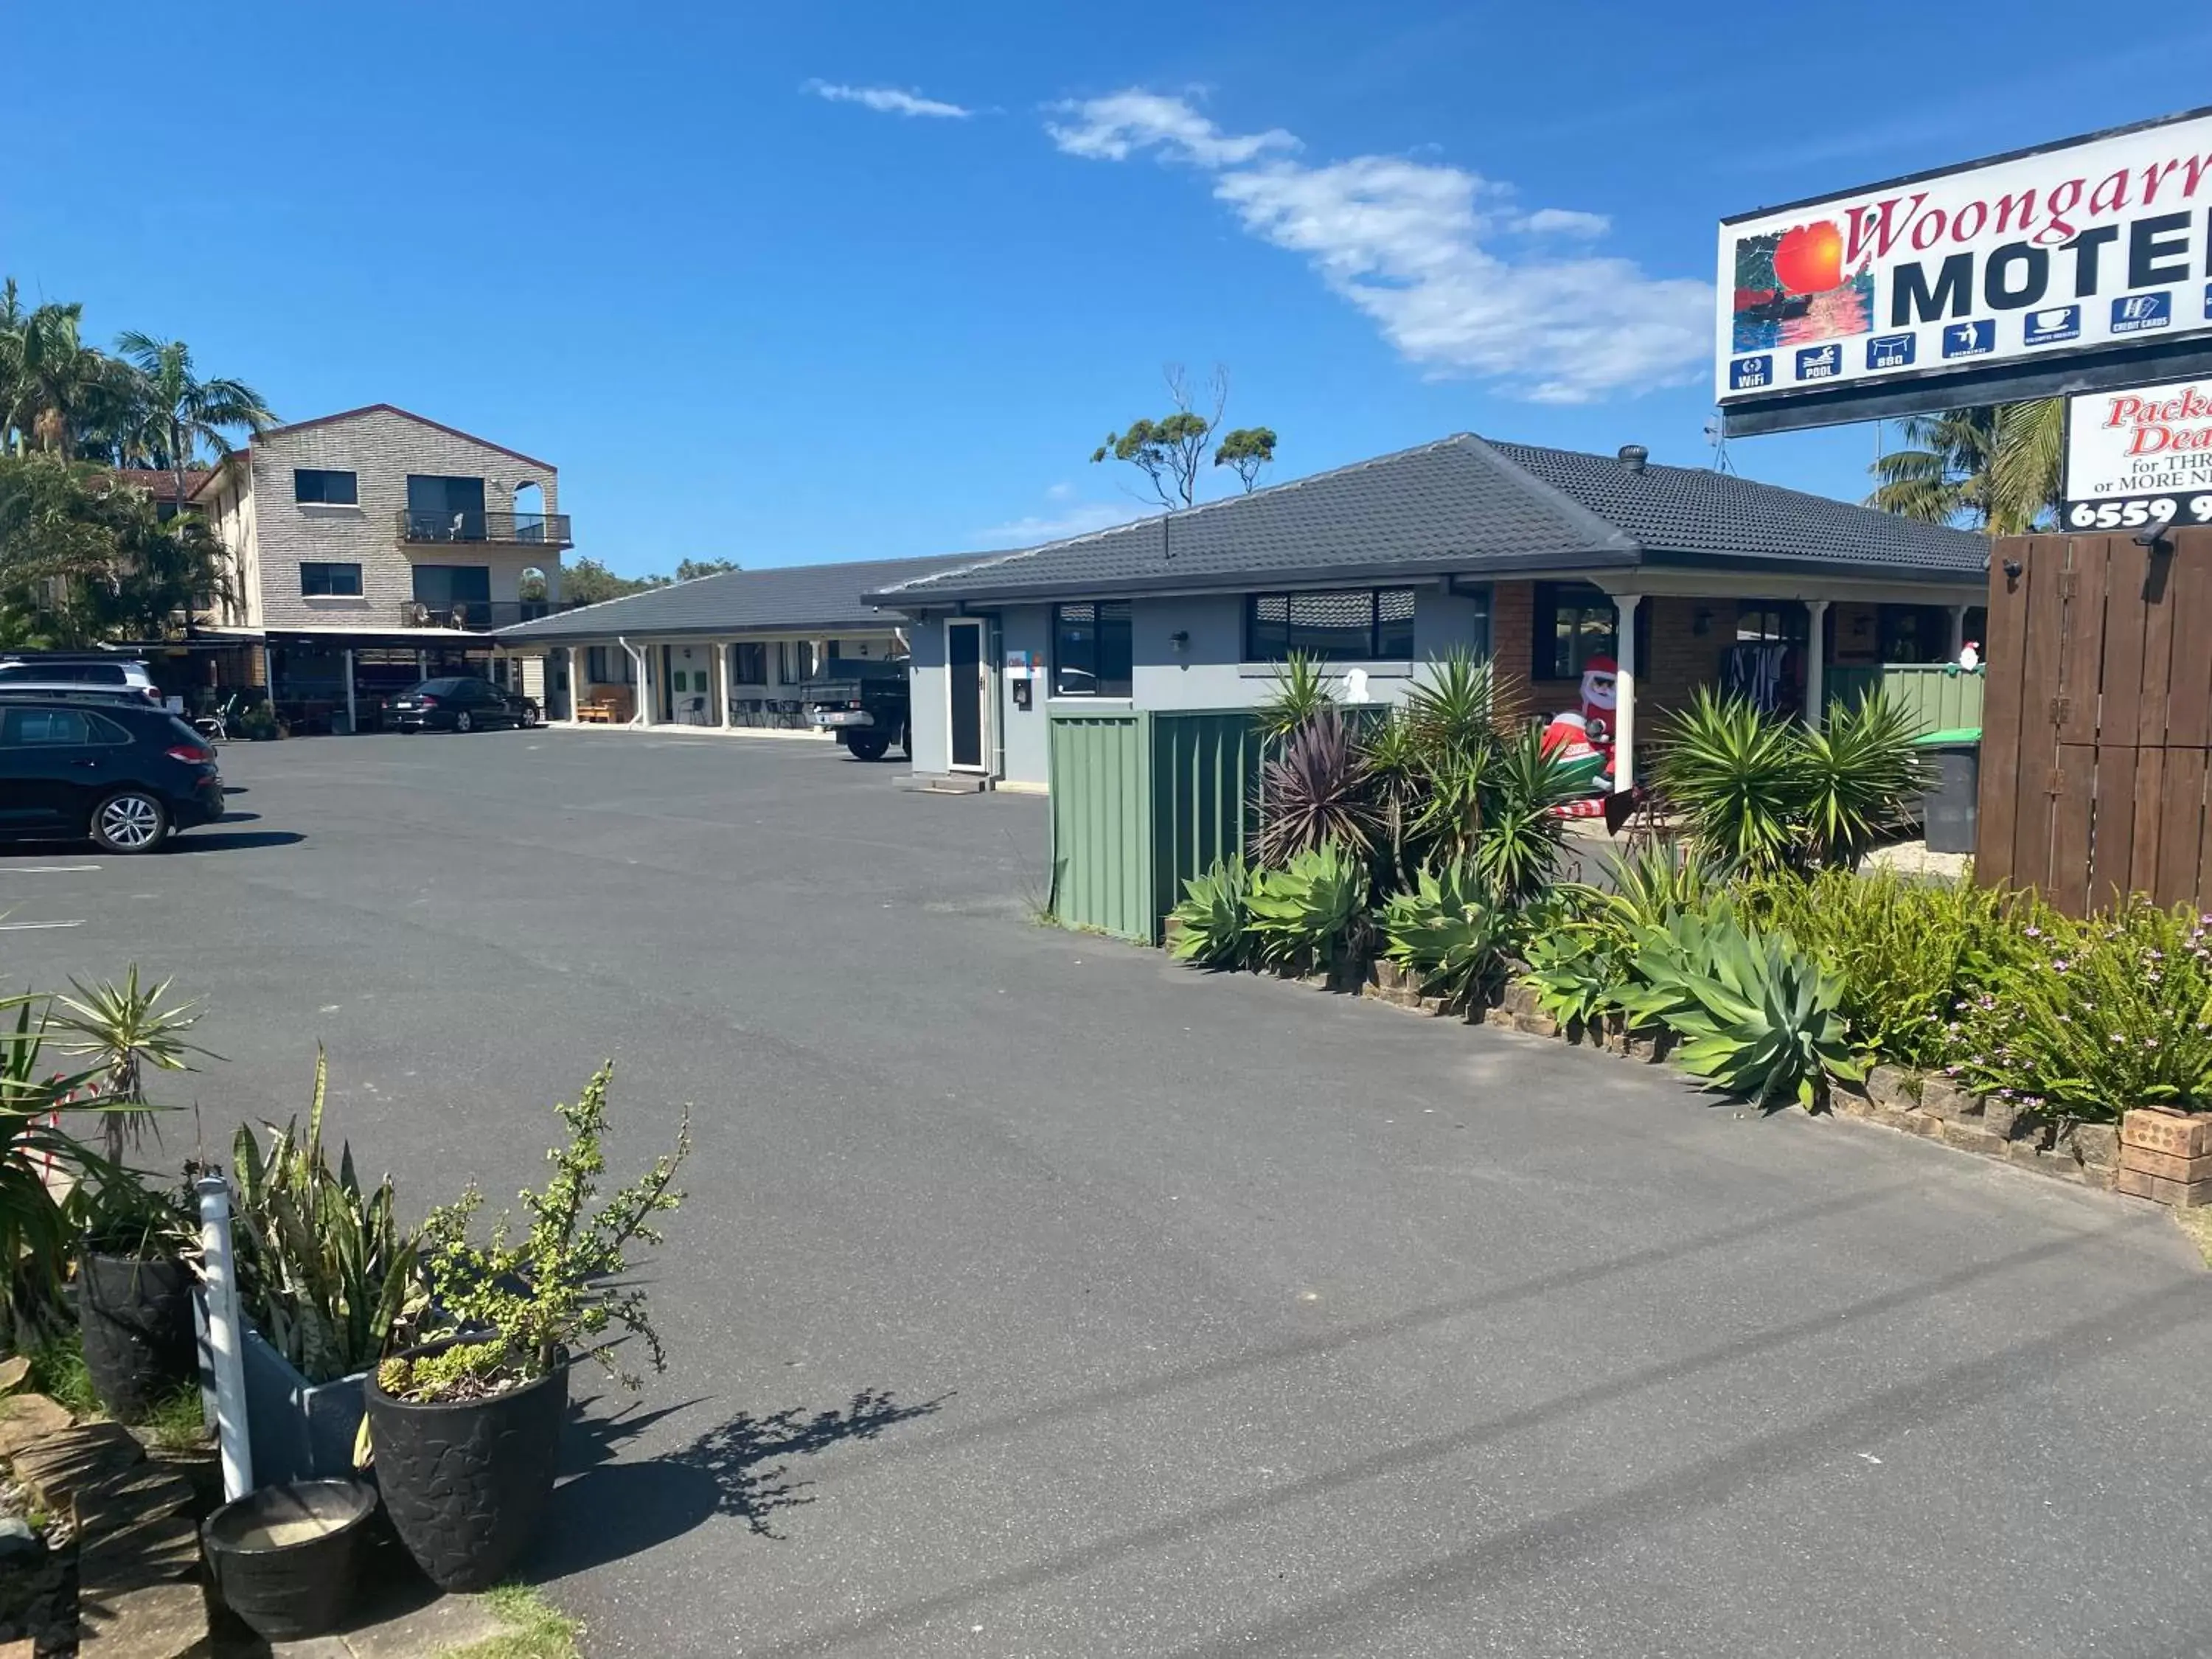 Property Building in Woongarra Motel